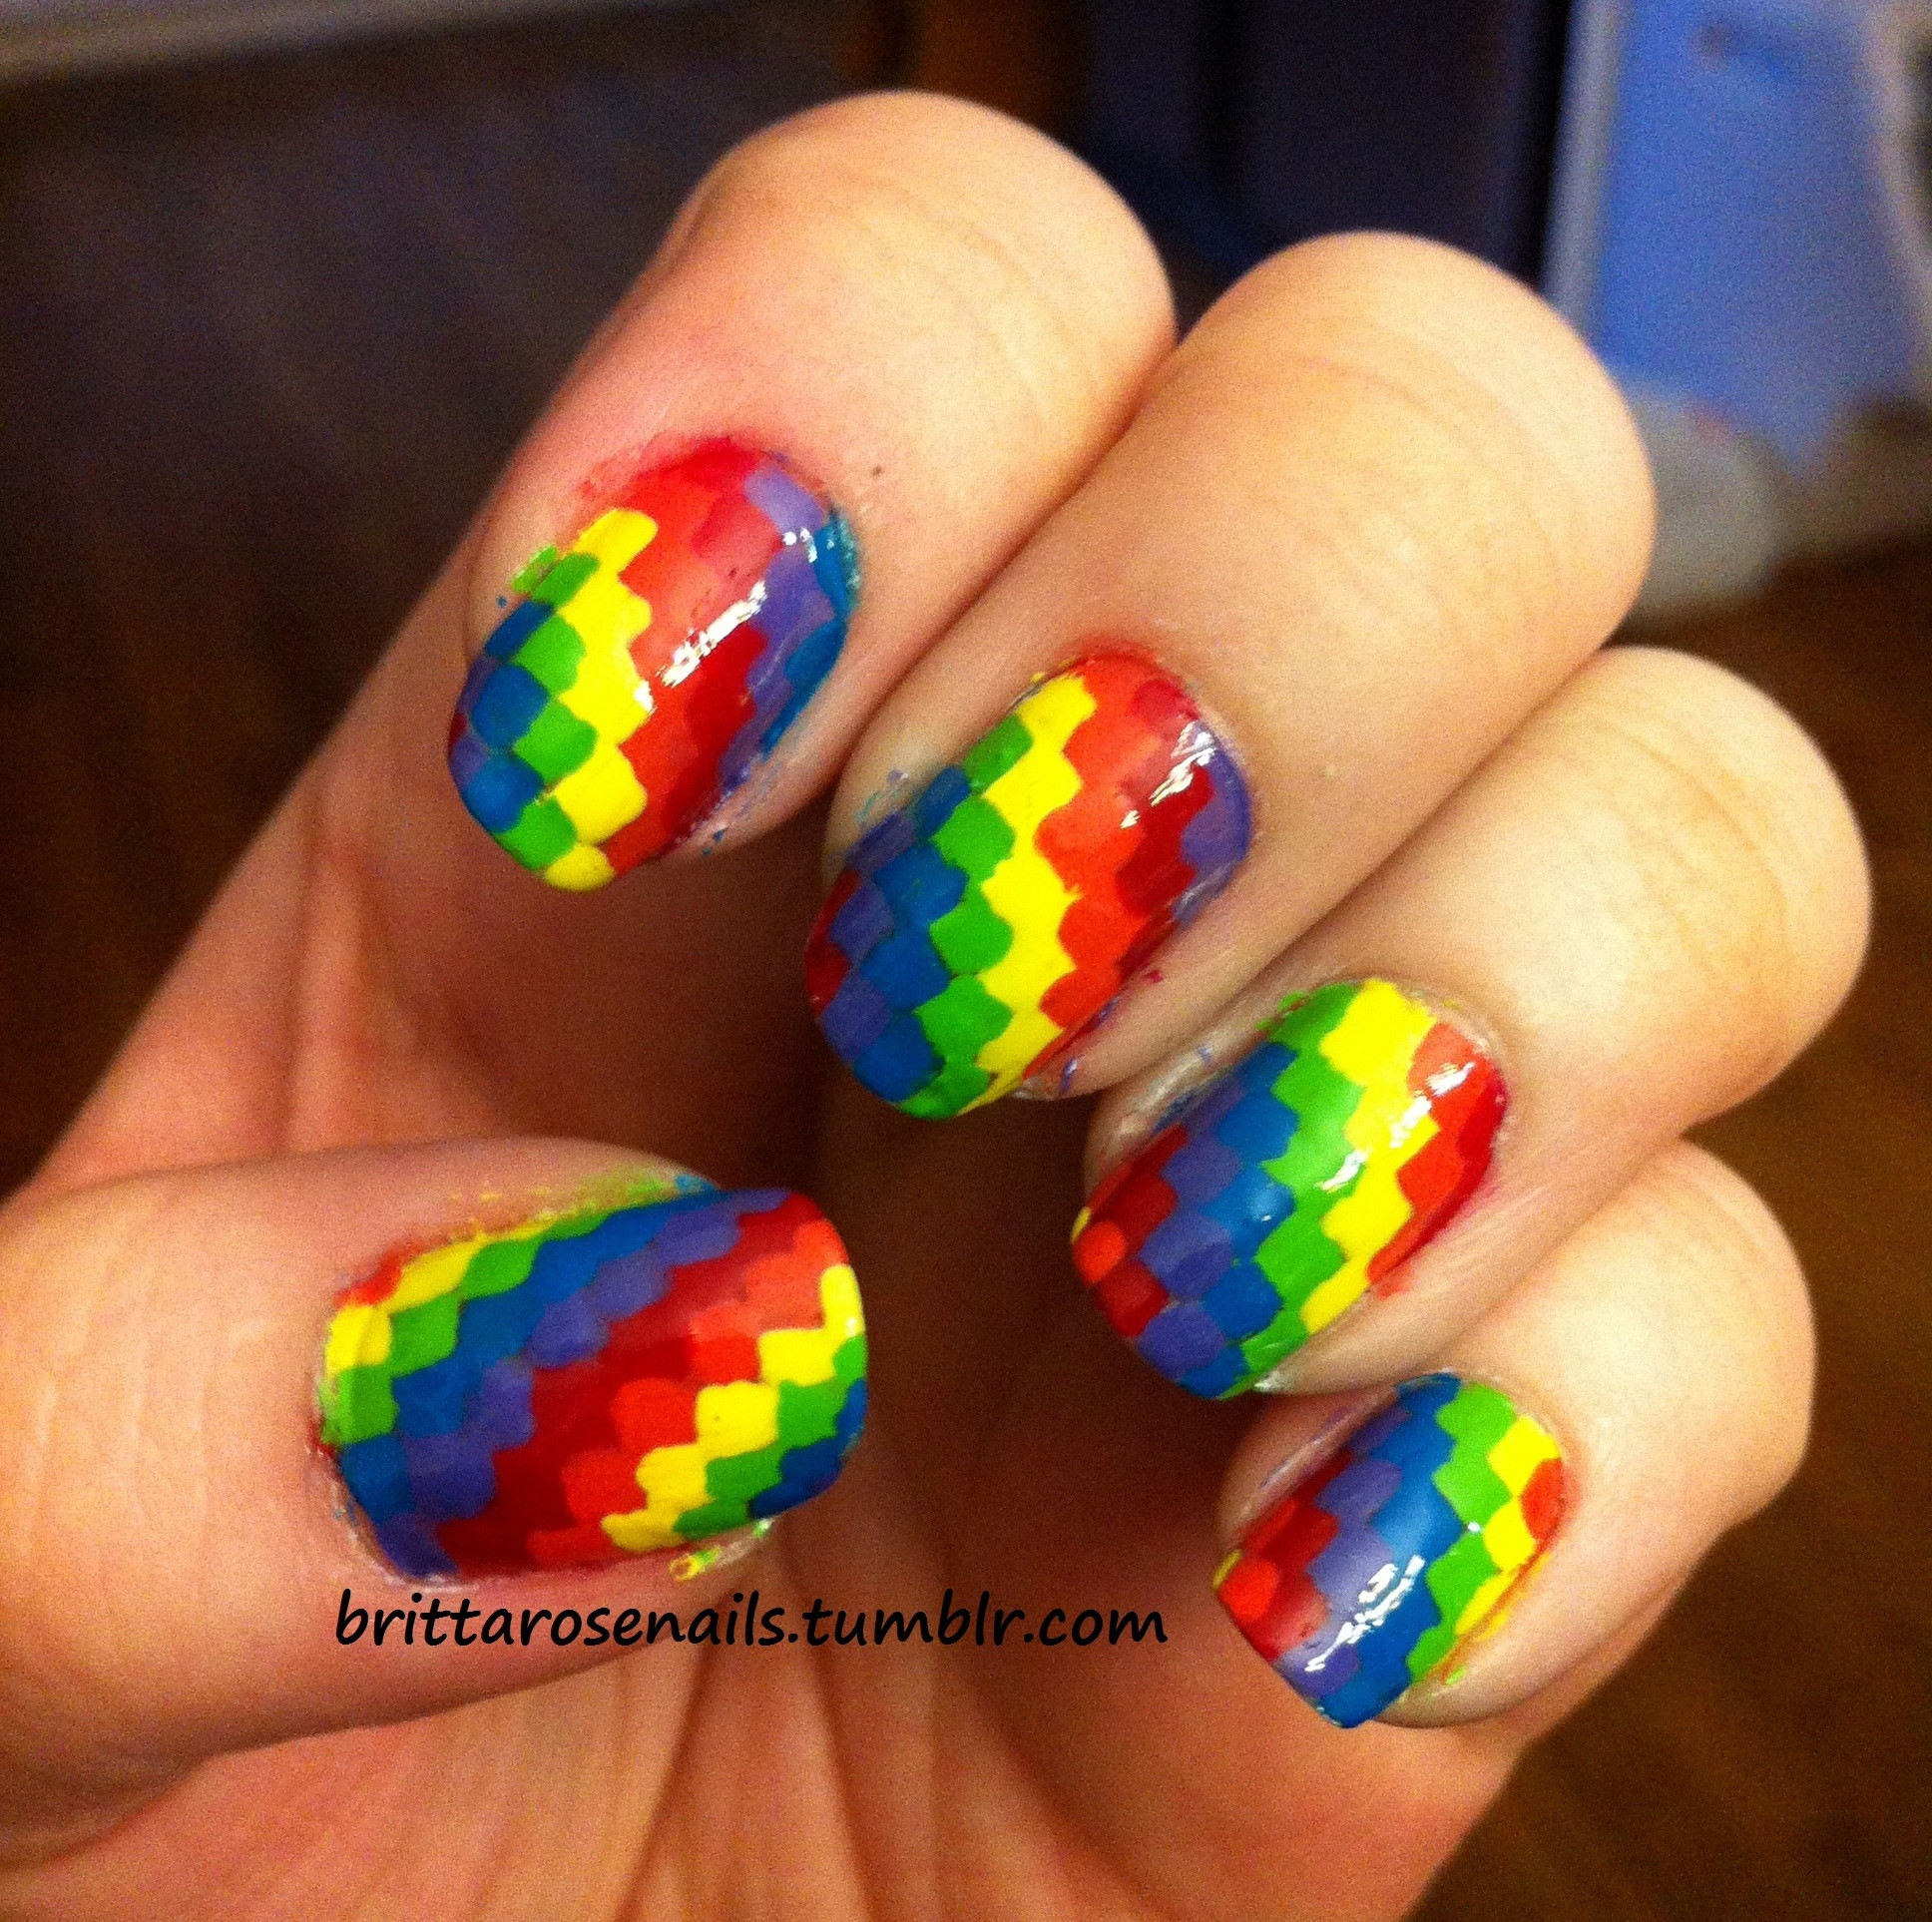 Pride Nail Designs
 The winners of the LGBT Pride Support contest